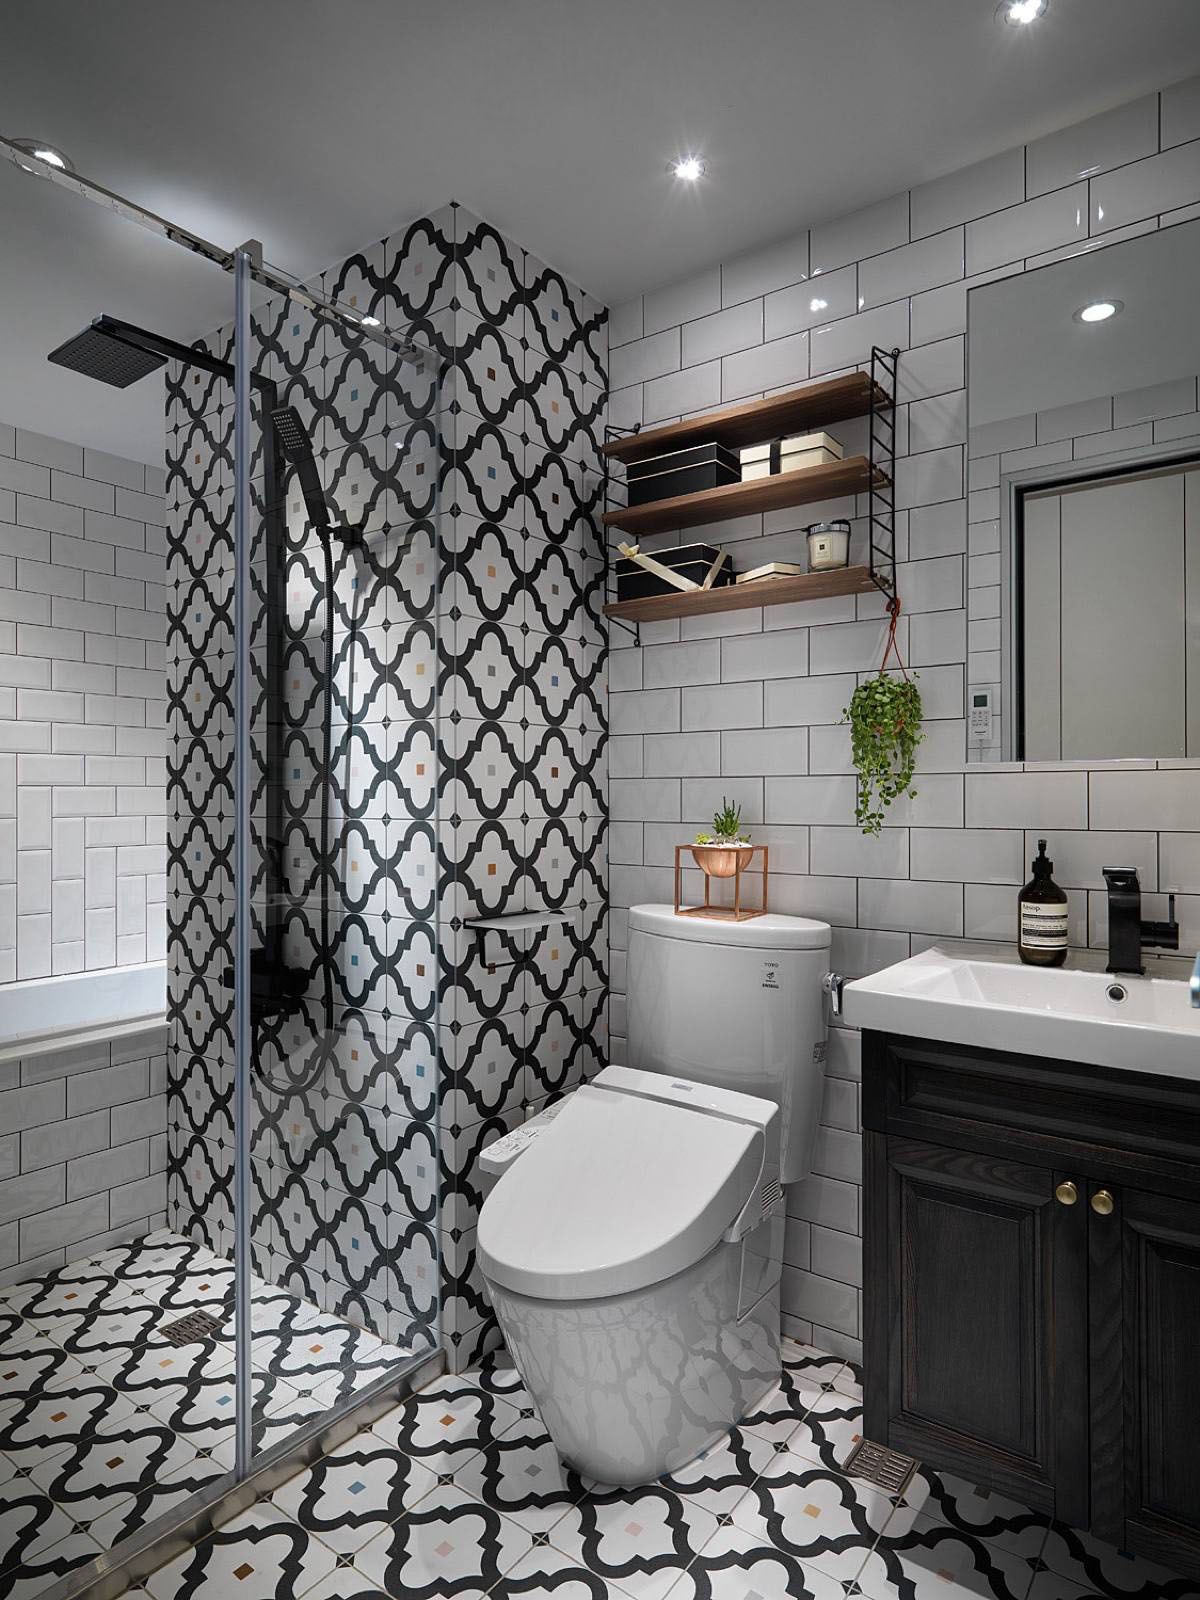 geometric bathroom design "width =" 1200 "height =" 1600 "srcset =" https://mileray.com/wp-content/uploads/2020/05/1588514714_451_Trendy-Bathroom-Designs-Combined-With-Modern-and-Geometric-Concept-Decor.jpg 1200w , https://mileray.com/wp-content/uploads/2017/04/patterned-bathroom-tiles-in-scandinavian-style-bathroom-225x300.jpg 225w, https://mileray.com/wp-content / uploads / 2017/04 / patterned-bathroom-tiles-in-scandinavian-style-bathroom-768x1024.jpg 768w, https://mileray.com/wp-content/uploads/2017/04/patterned-bathroom-tiles- bathroom in Scandinavian style 696x928.jpg 696w, https://mileray.com/wp-content/uploads/2017/04/patterned-bathroom-tiles-in-scandinavian-style-bathroom-1068x1424.jpg 1068w, https: // myfashionos .com / wp-content / uploads / 2017/04 / patterned-bathroom-tiles-in-scandinavian-style-bathroom-315x420.jpg 315w "Sizes =" (maximum width: 1200px) 100vw, 1200px